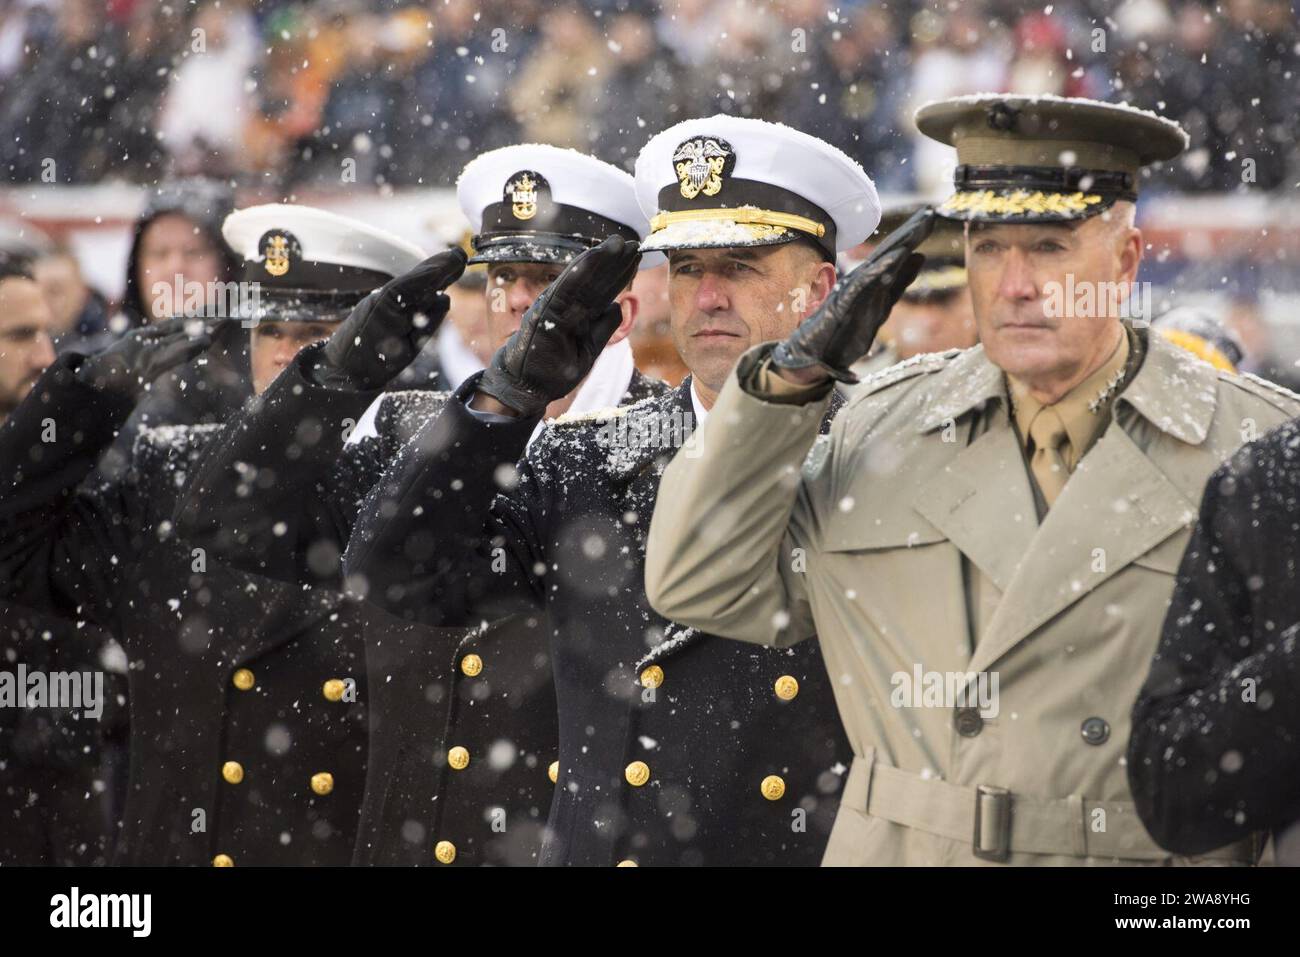 US military forces. 171210AT895-696  PHILADELPHIA (Dec. 10, 2017)  Chairman of the Joint Chiefs of Staff Gen. Joseph Dunford, right, Chief of Naval Operations (CNO) Adm. John Richardson, middle, Master Chief Petty Officer of the Navy (MCPON) Steven Giordano, left, and U.S. Naval Academy Command Master Chief Jeffrey Kirby salute during the playing of the national anthem at the 2017 Army-Navy football game in Philadelphia. This was the 118th meeting between the U.S. Naval Academy Midshipmen and the U.S. Military Academy Black Knights, with Army defeating Navy 14-13. (U.S. Navy photo by Mass Comm Stock Photo